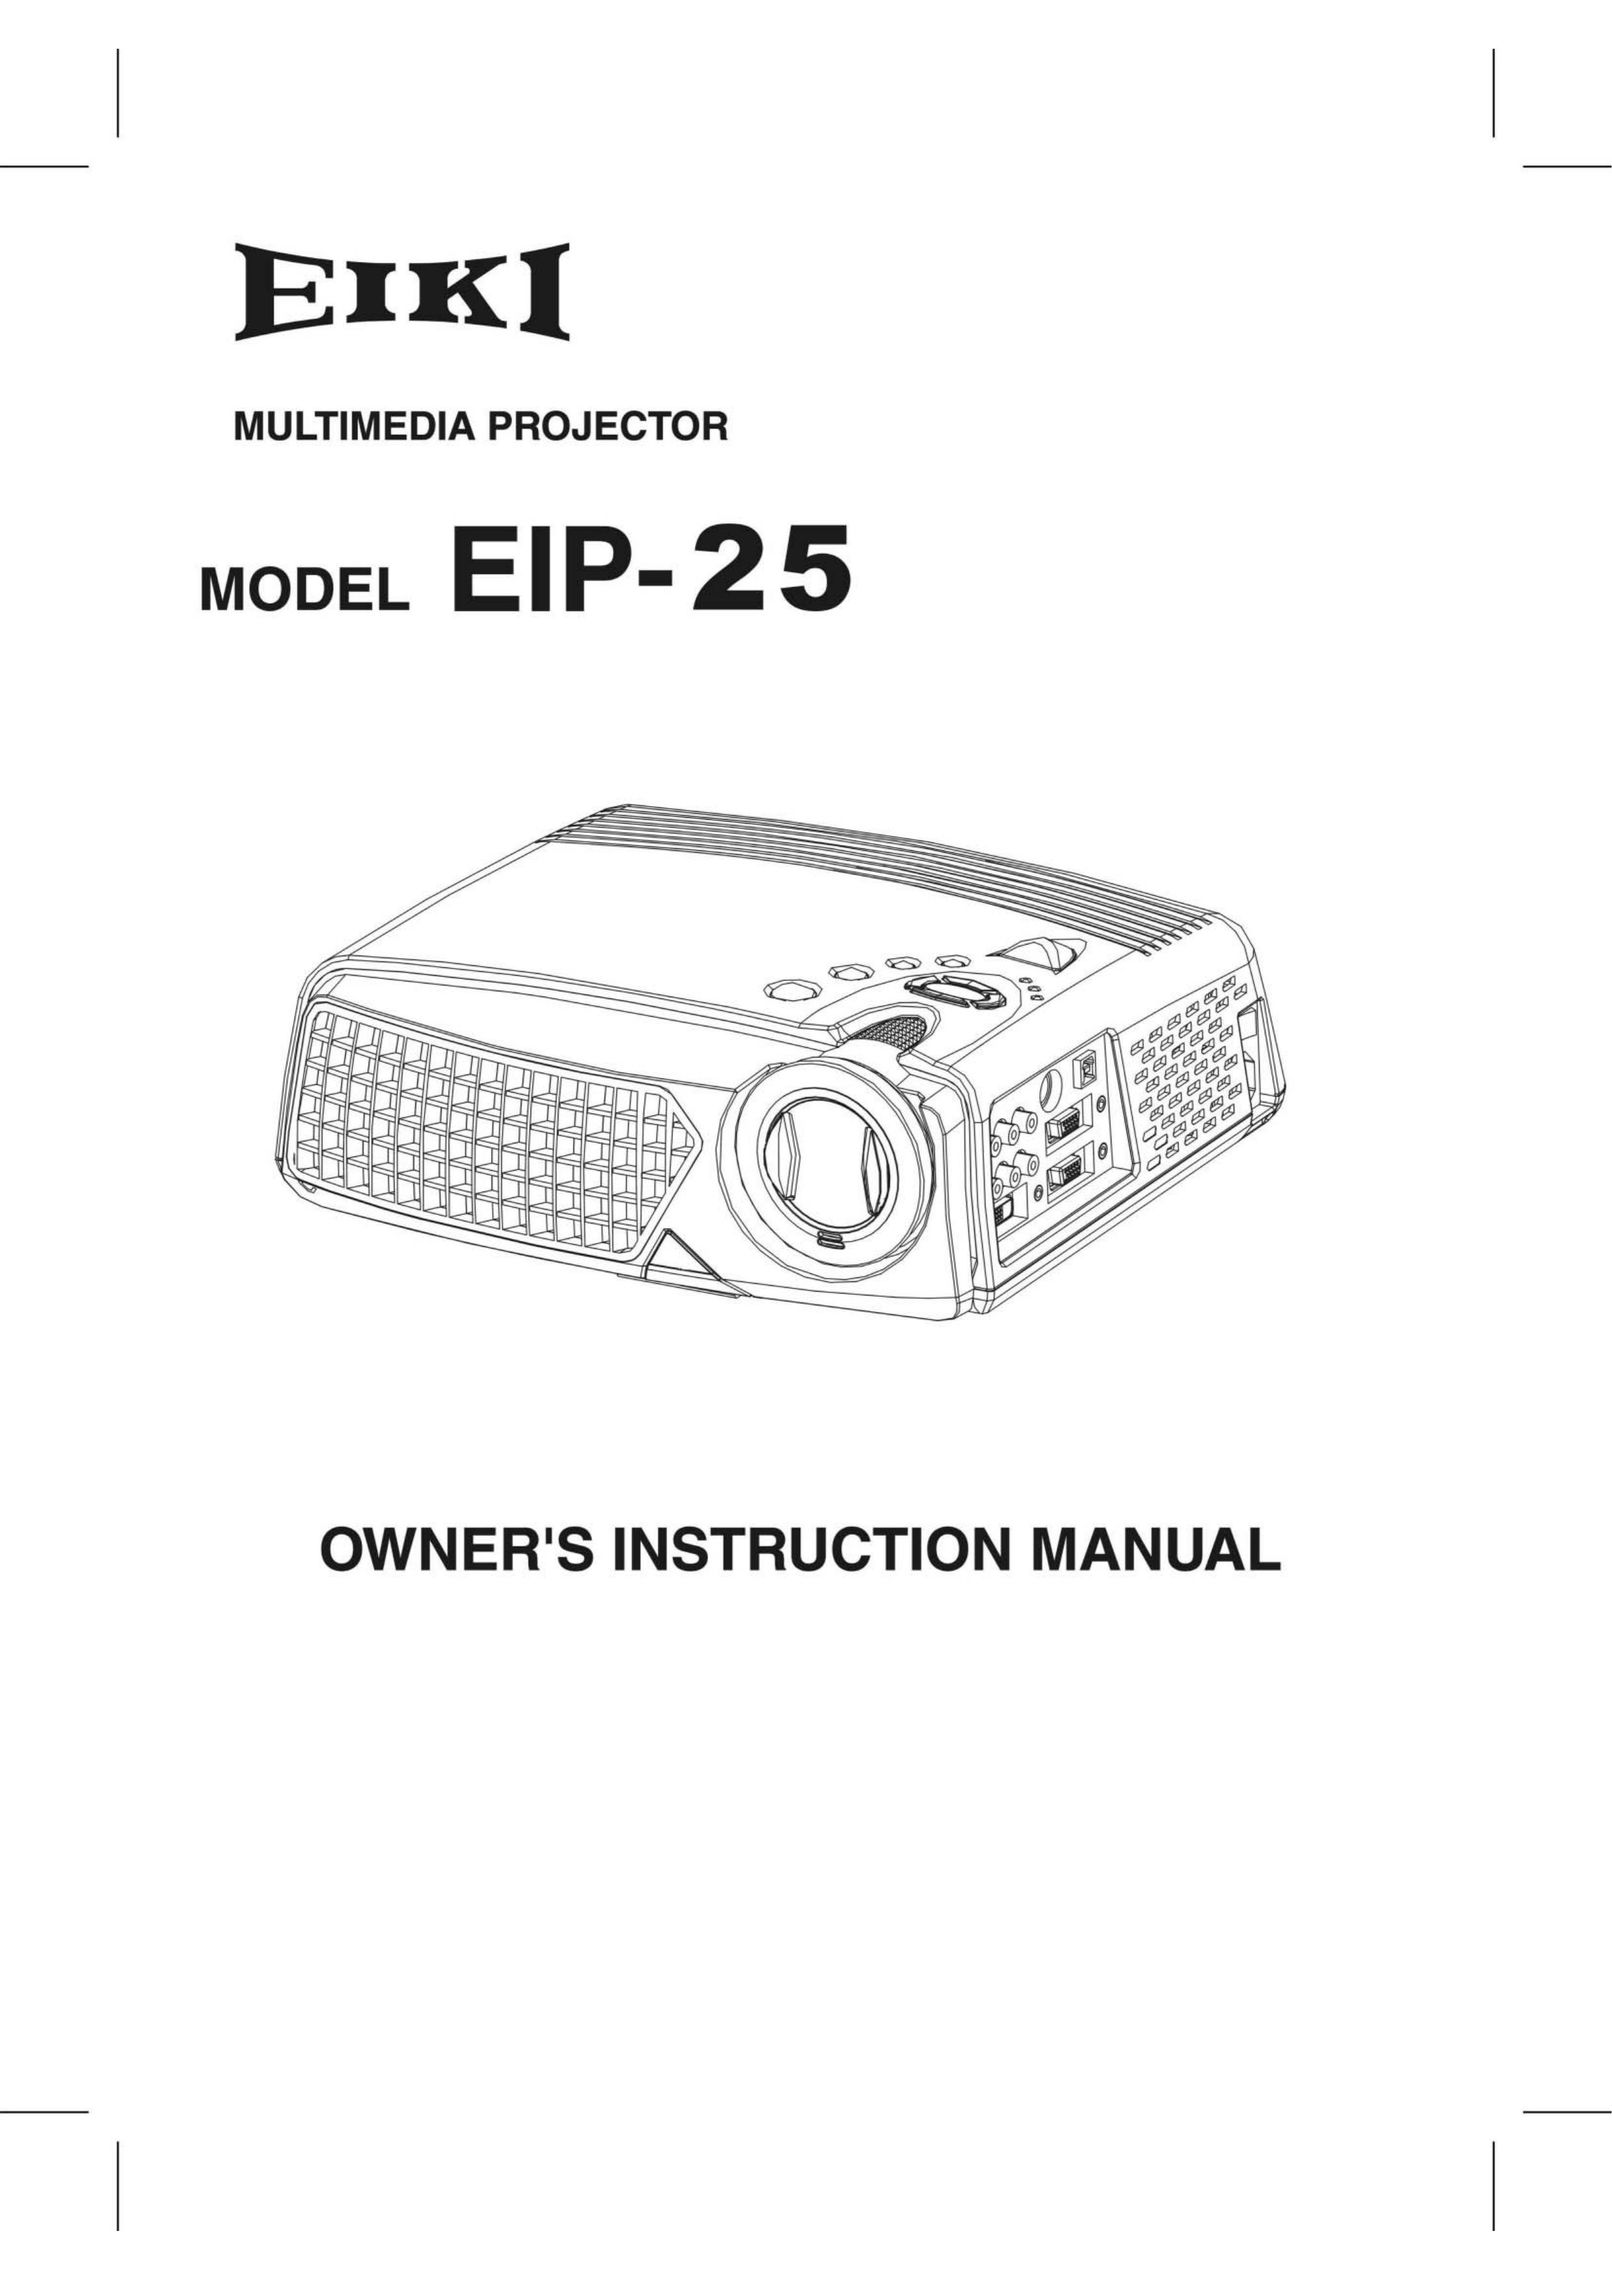 Eiki EIP-25 Projection Television User Manual